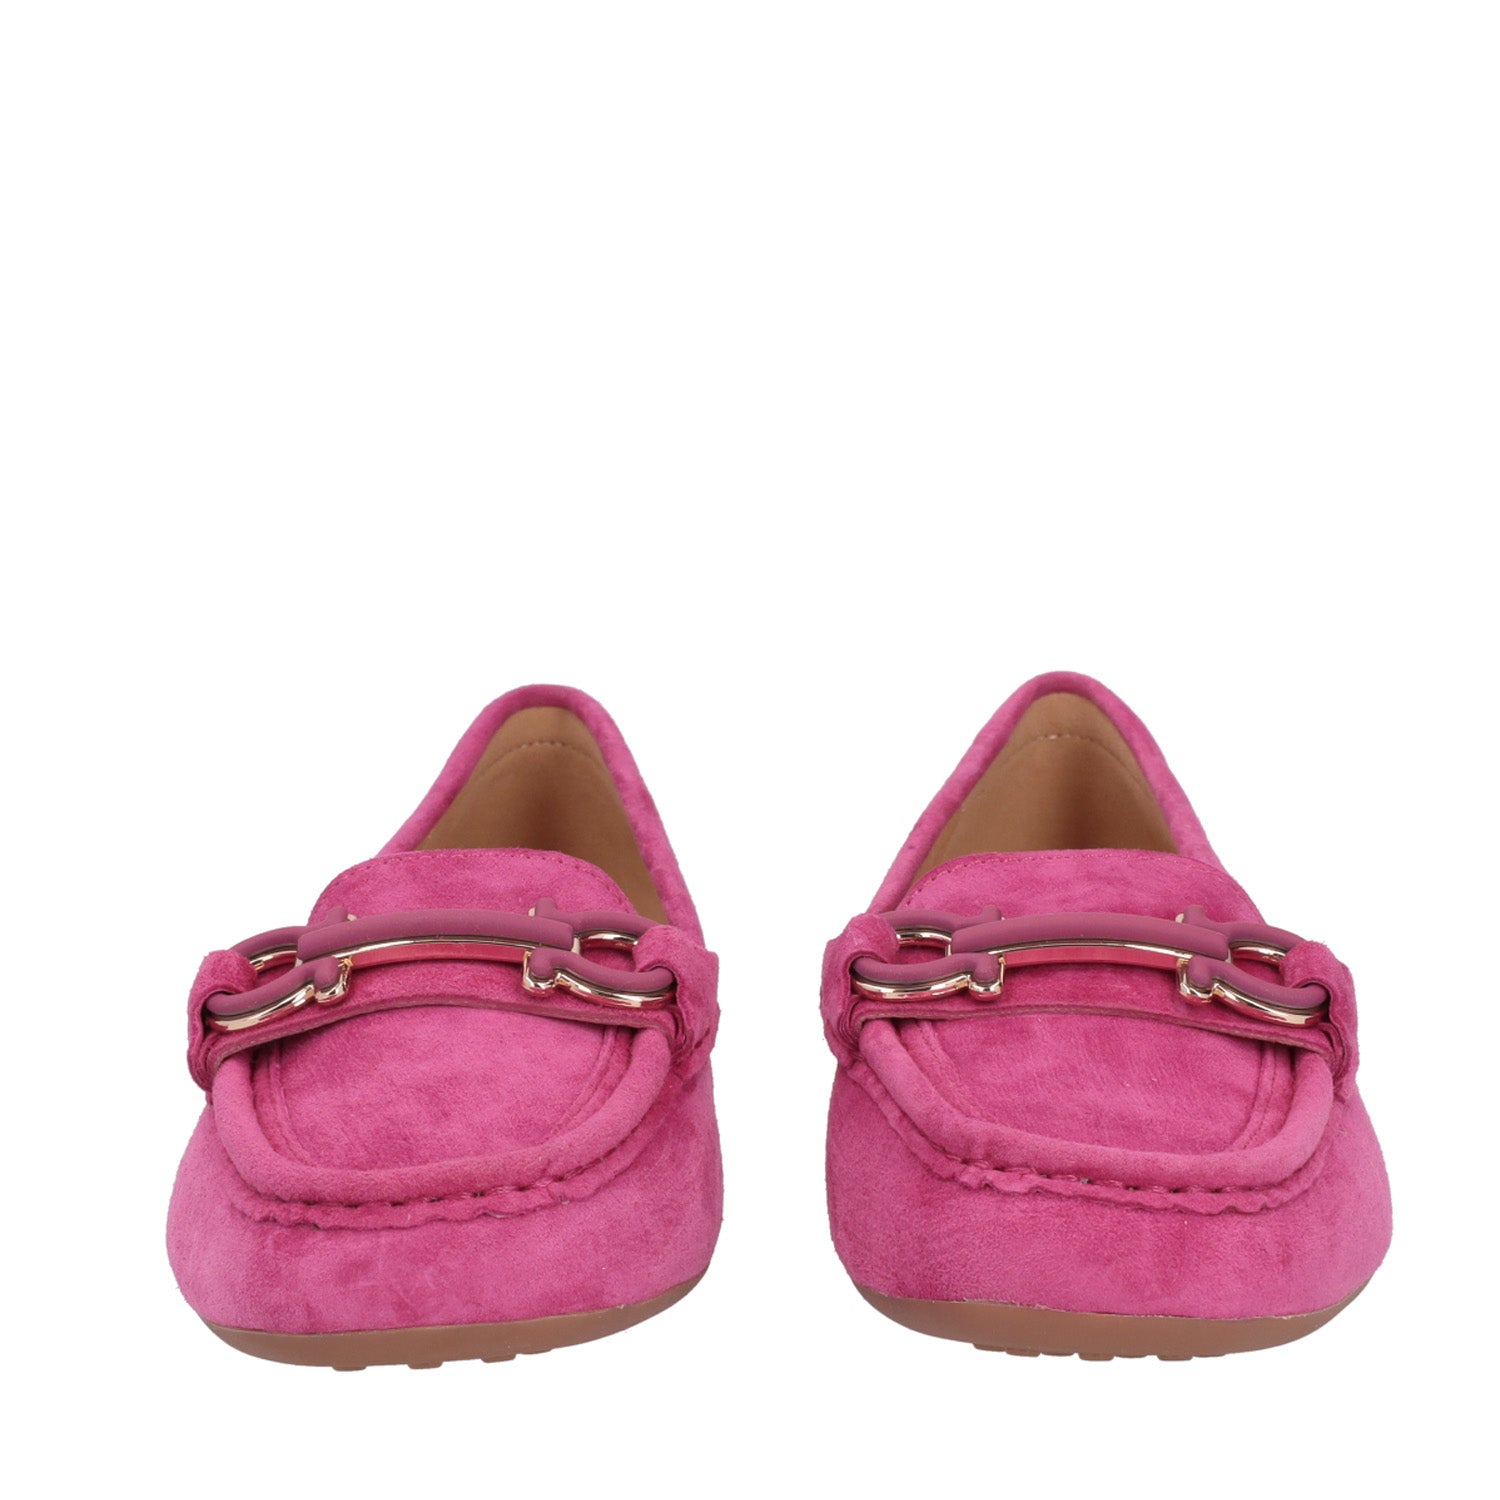 FUCHSIA CARMEN LEATHER MOCCASIN WITH CLAMP